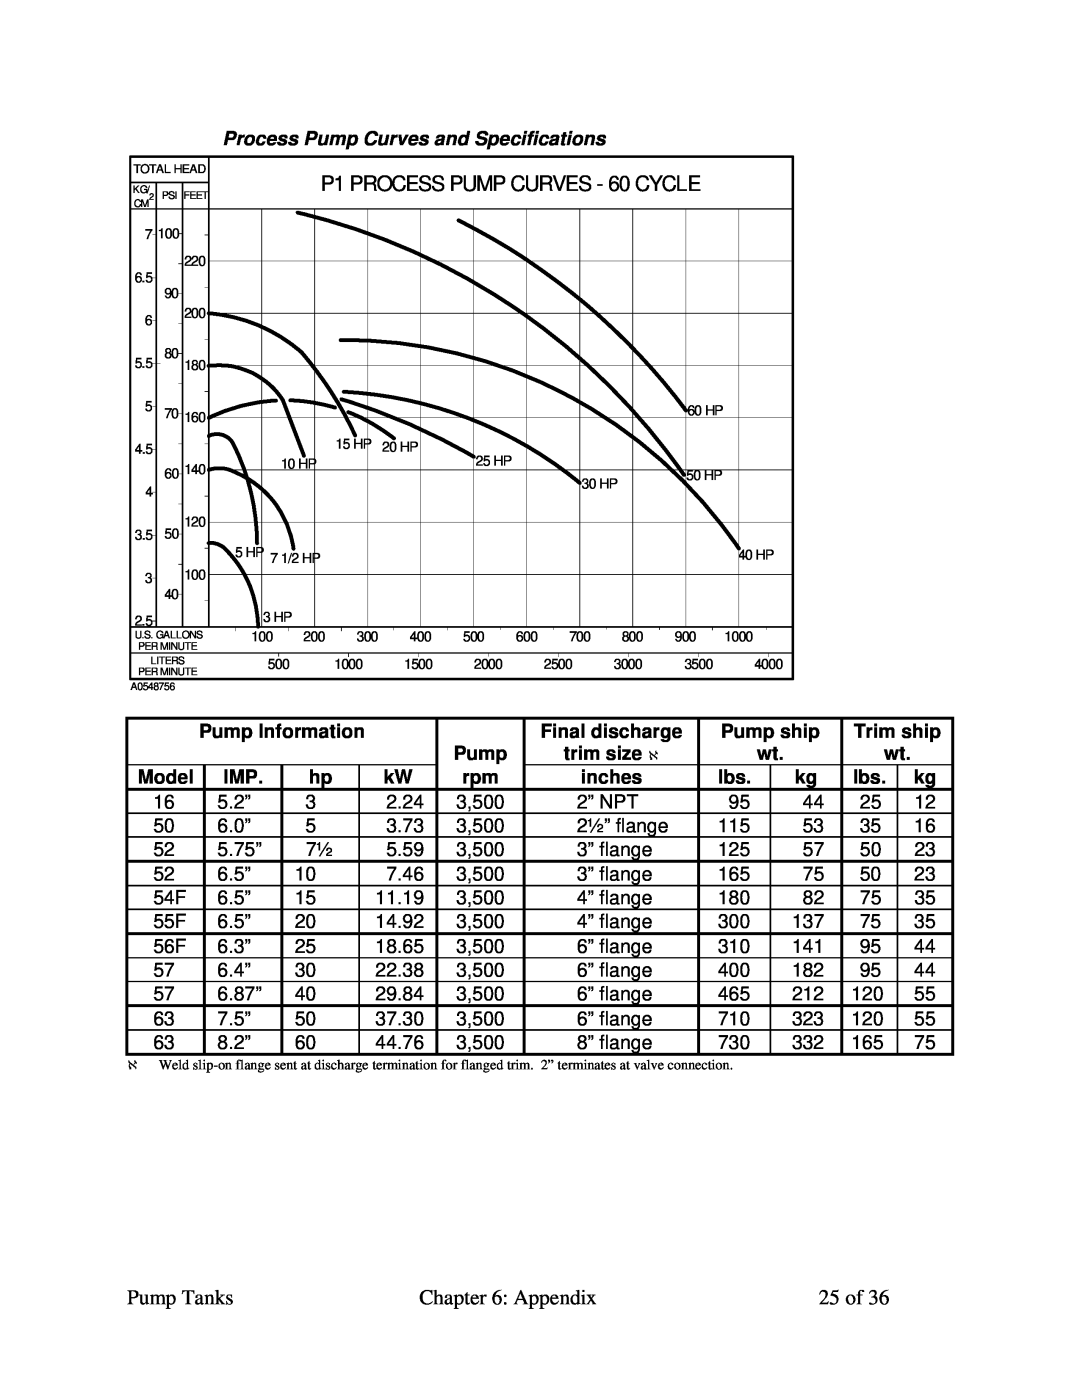 Sterling A0552321 P1 PROCESS PUMP CURVES - 60 CYCLE, Process Pump Curves and Specifications, Pump Information, Pump ship 